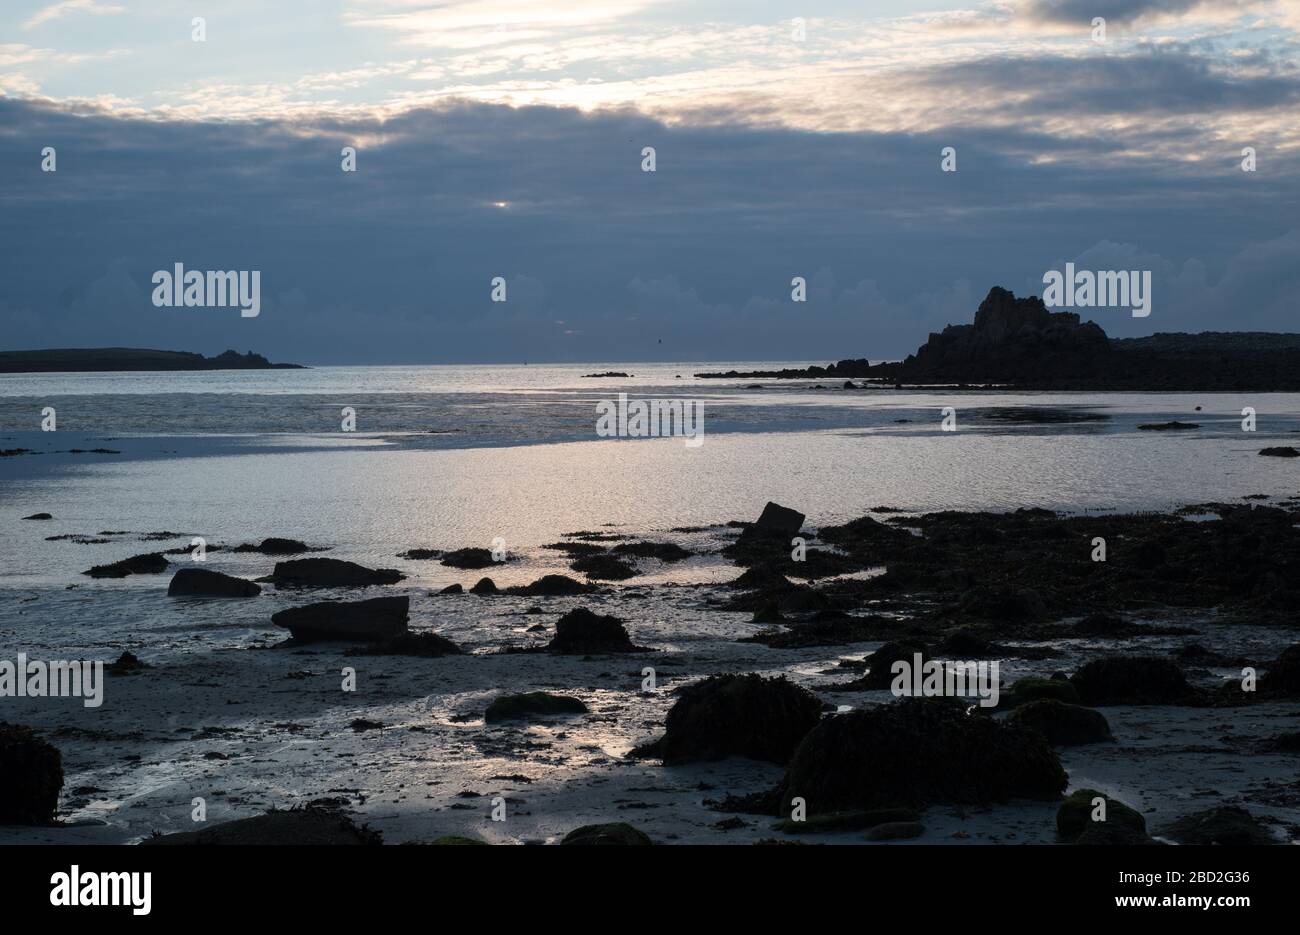 Sunset over Annet island viewed from Periglis beach on St Agnes, Isles of Scilly Stock Photo